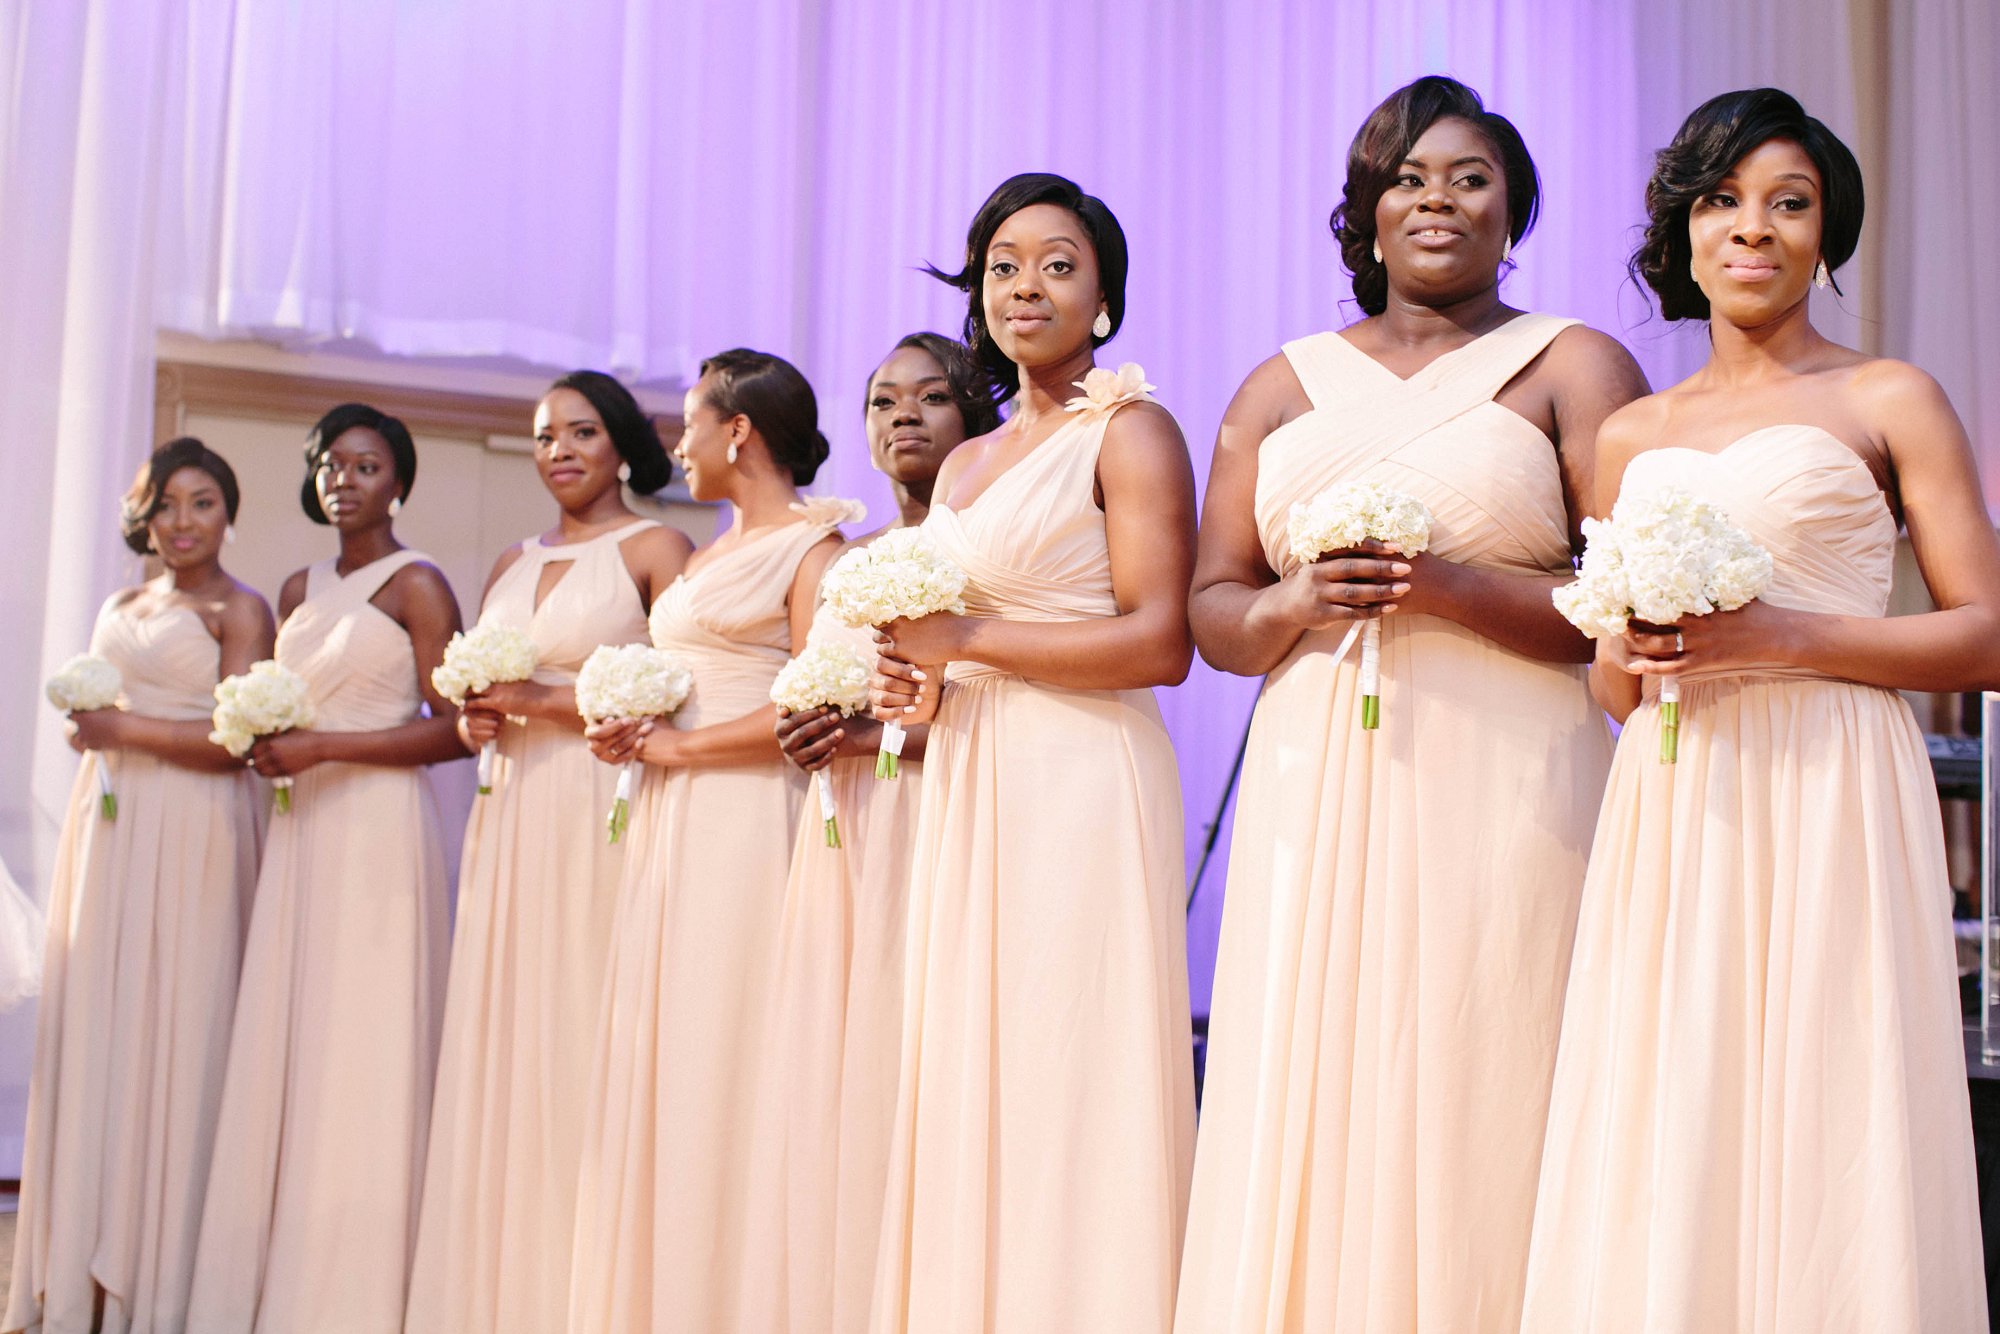 Nude and Tan colored bridesmaids dresses